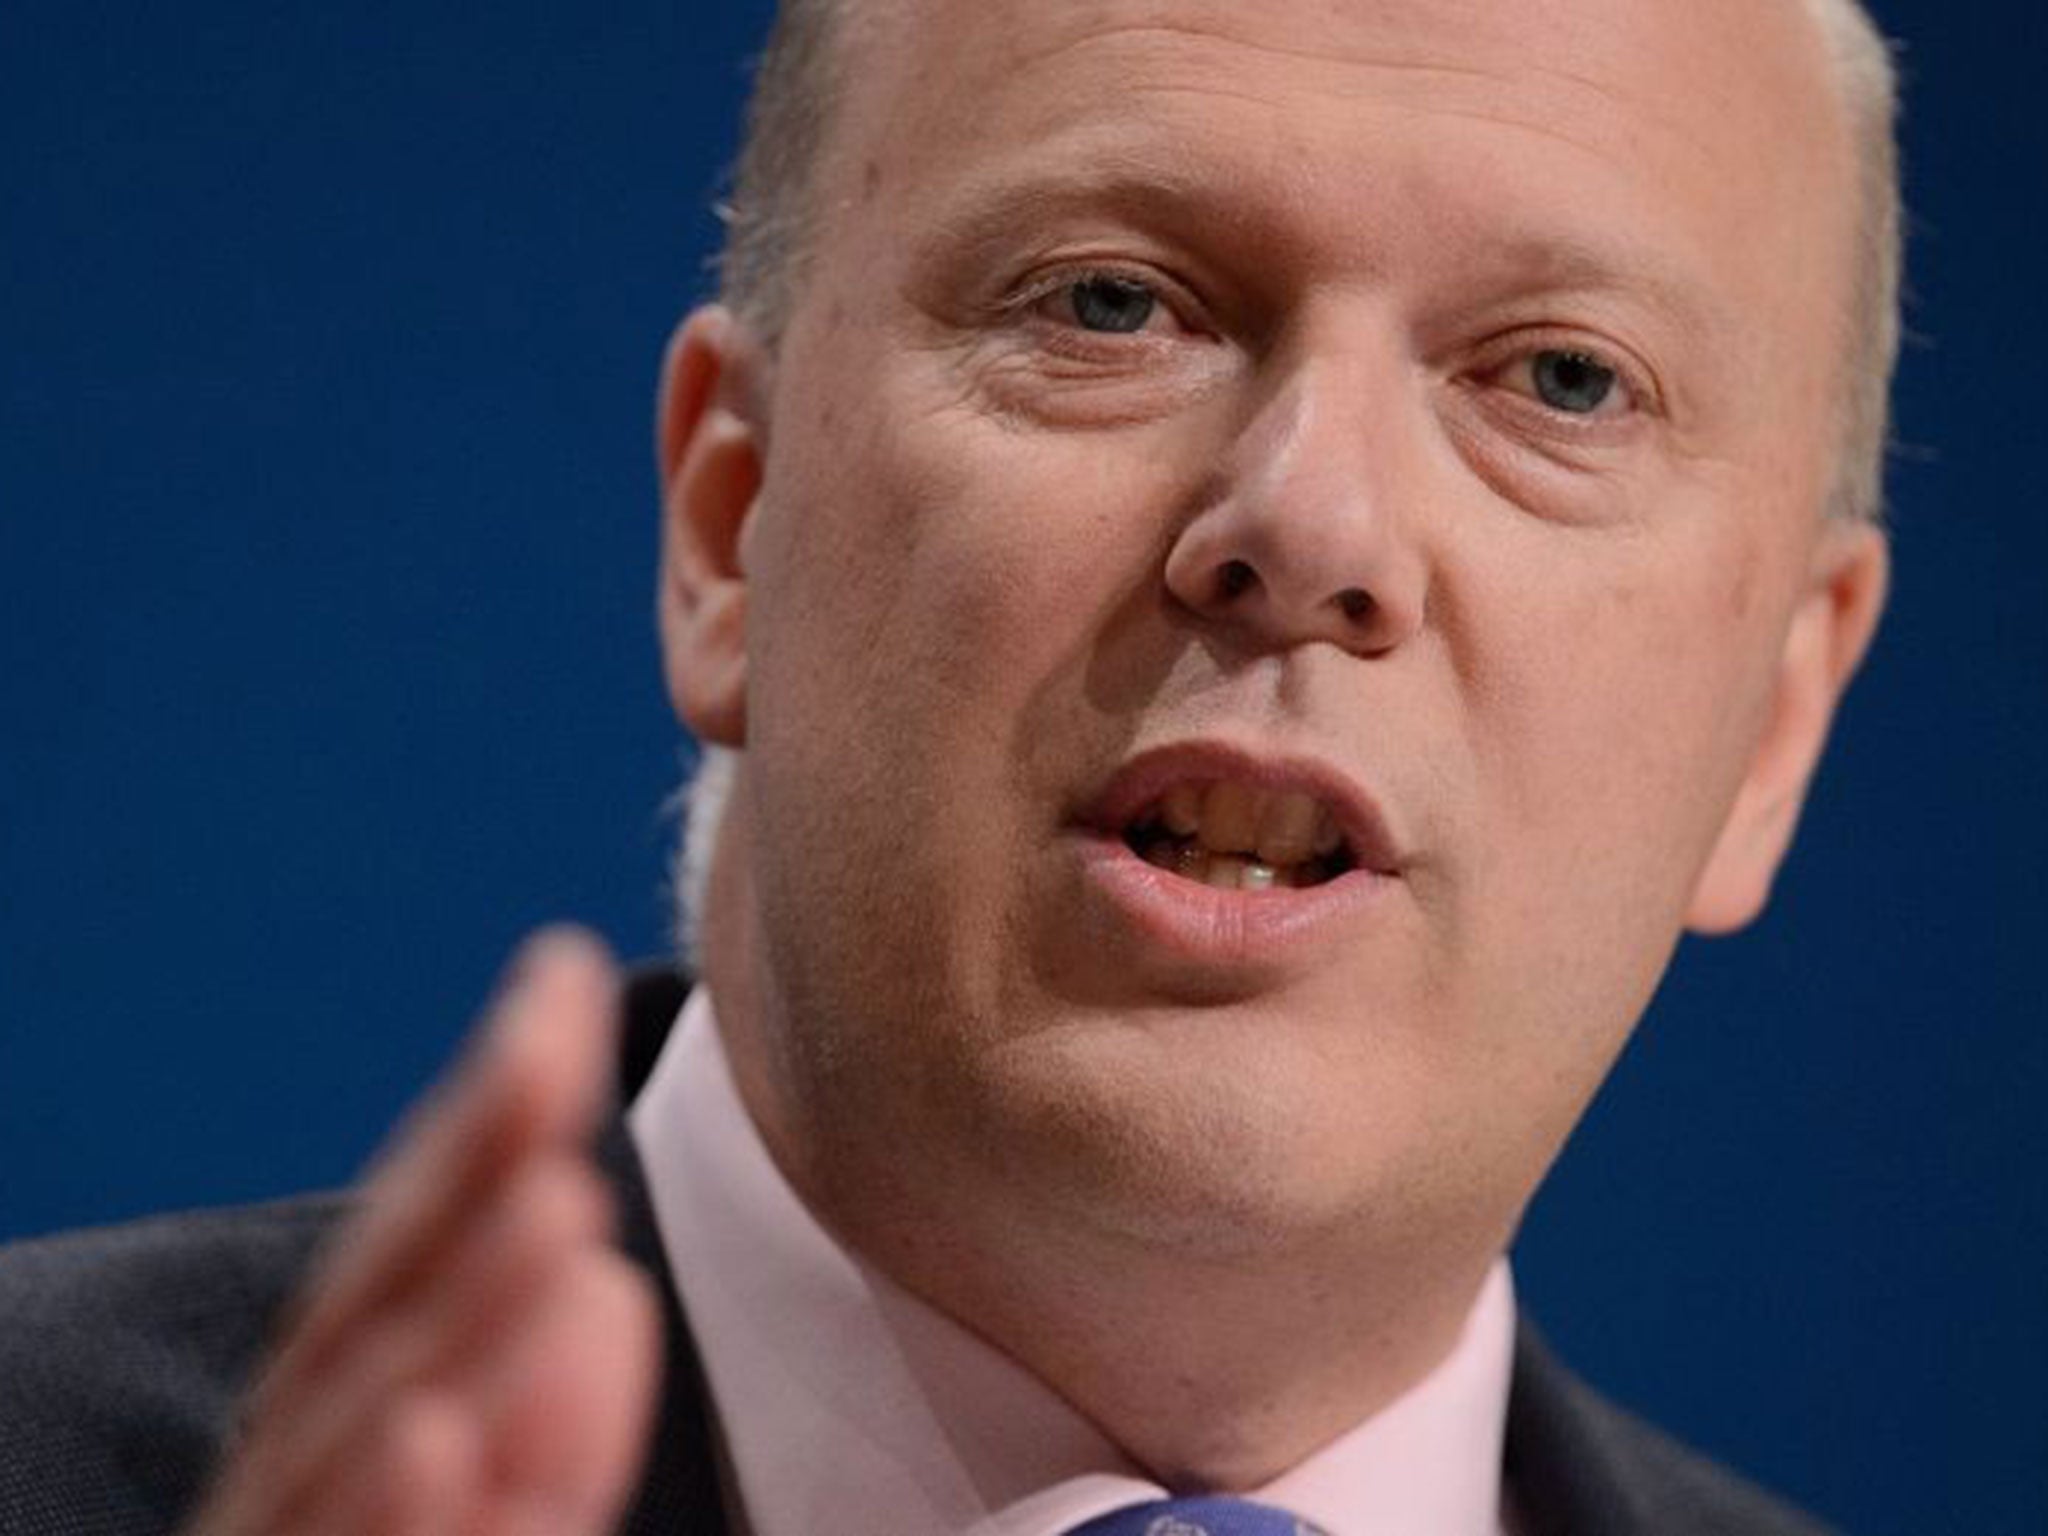 Chris Grayling and the Conservatives remain clueless on how the union and further devolution can work together